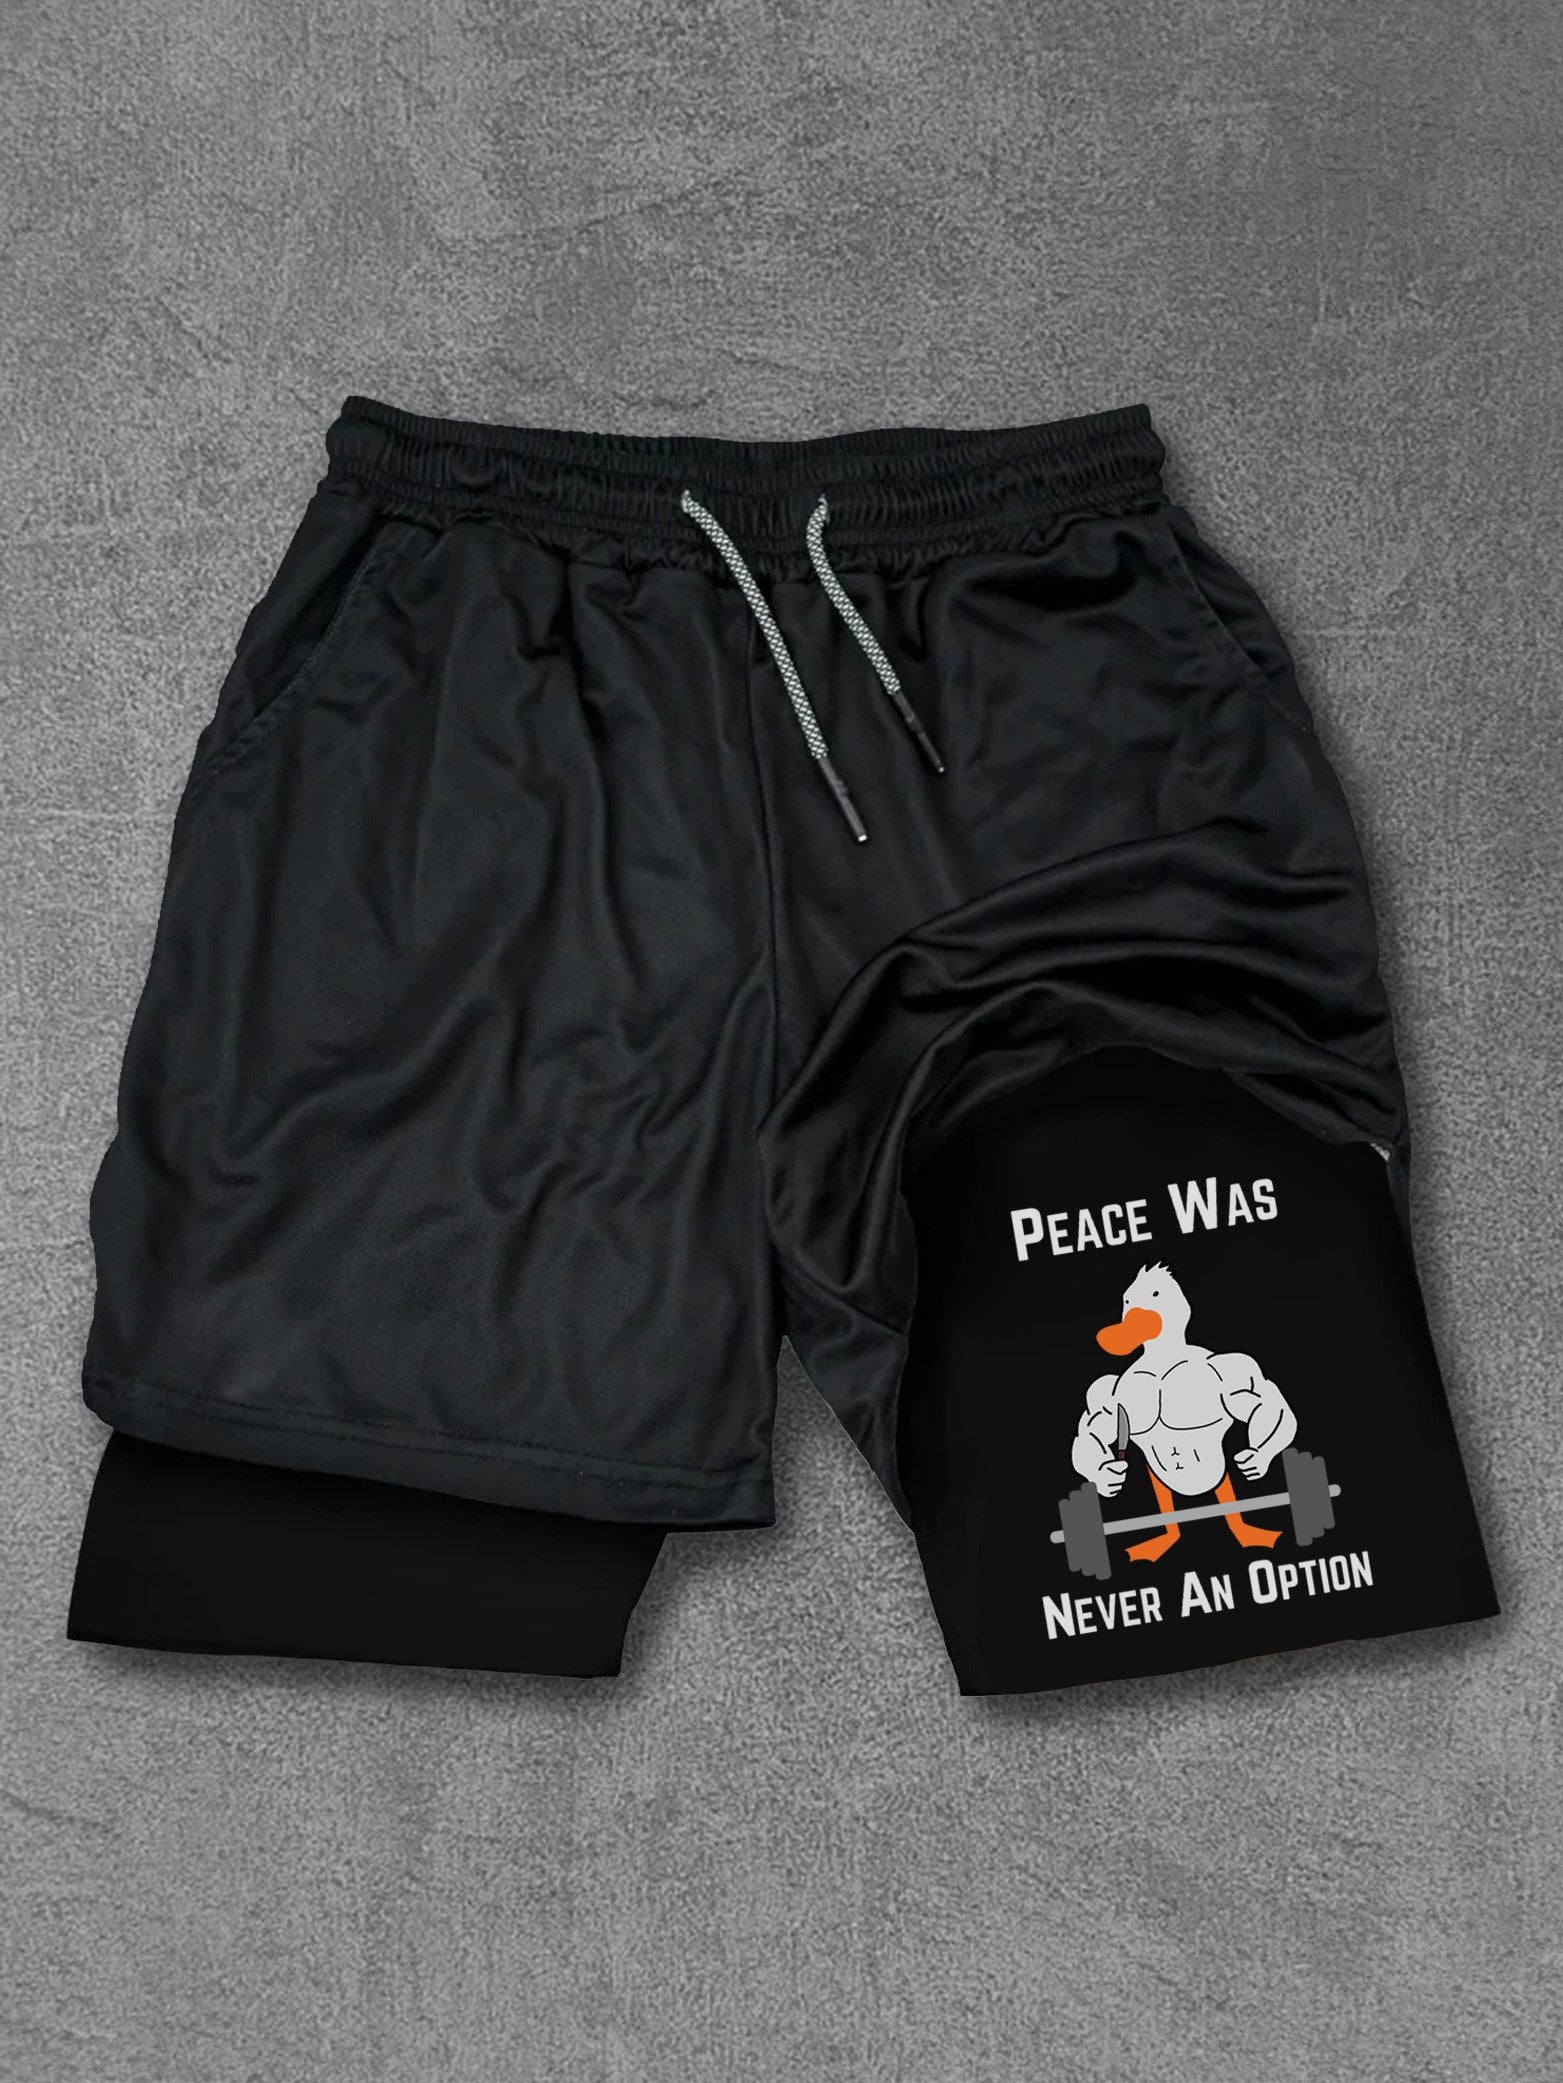 peace was never an option Performance Training Shorts